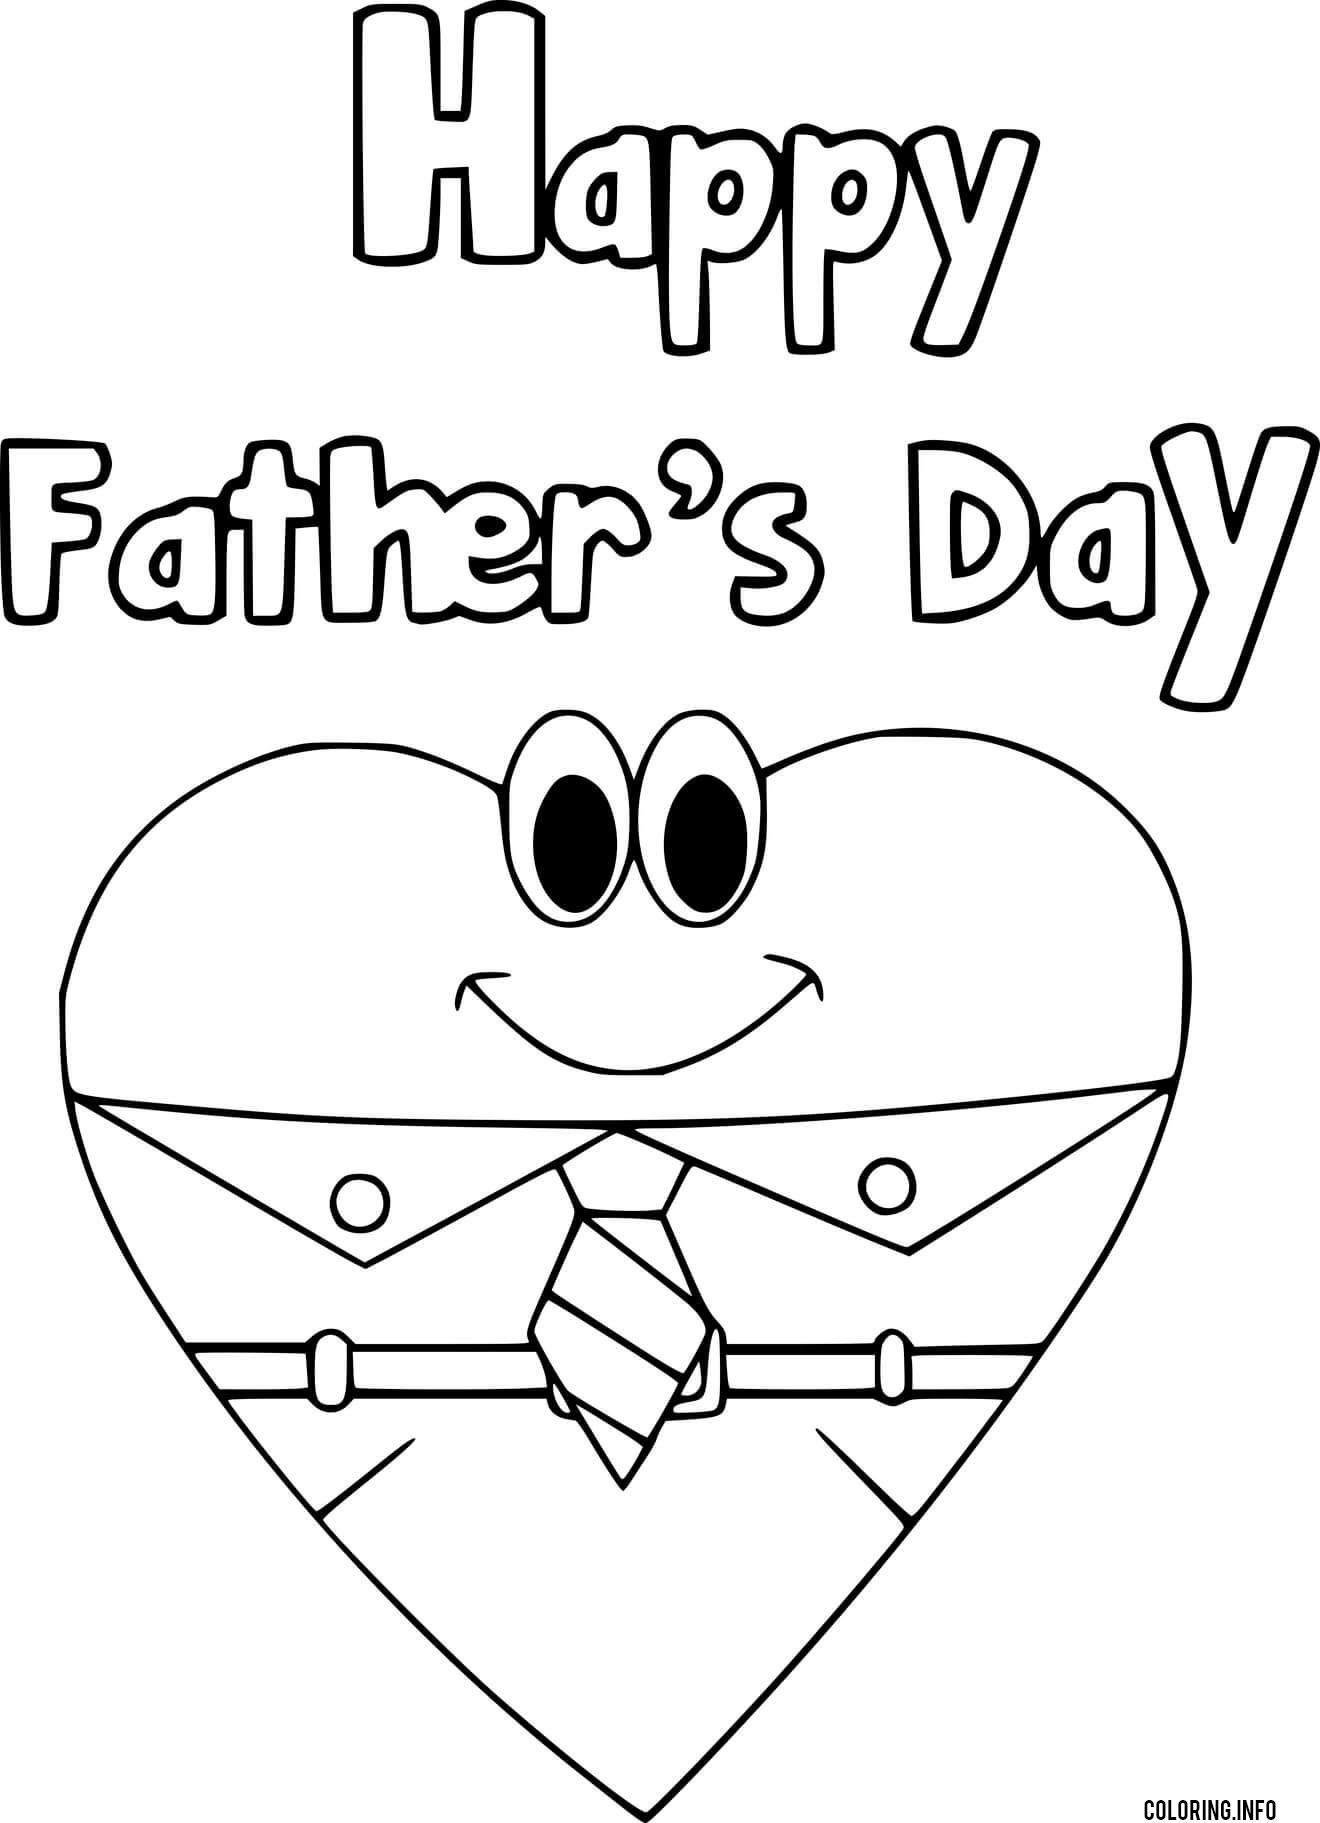 Happy Fathers Day And A Heart With Tie coloring